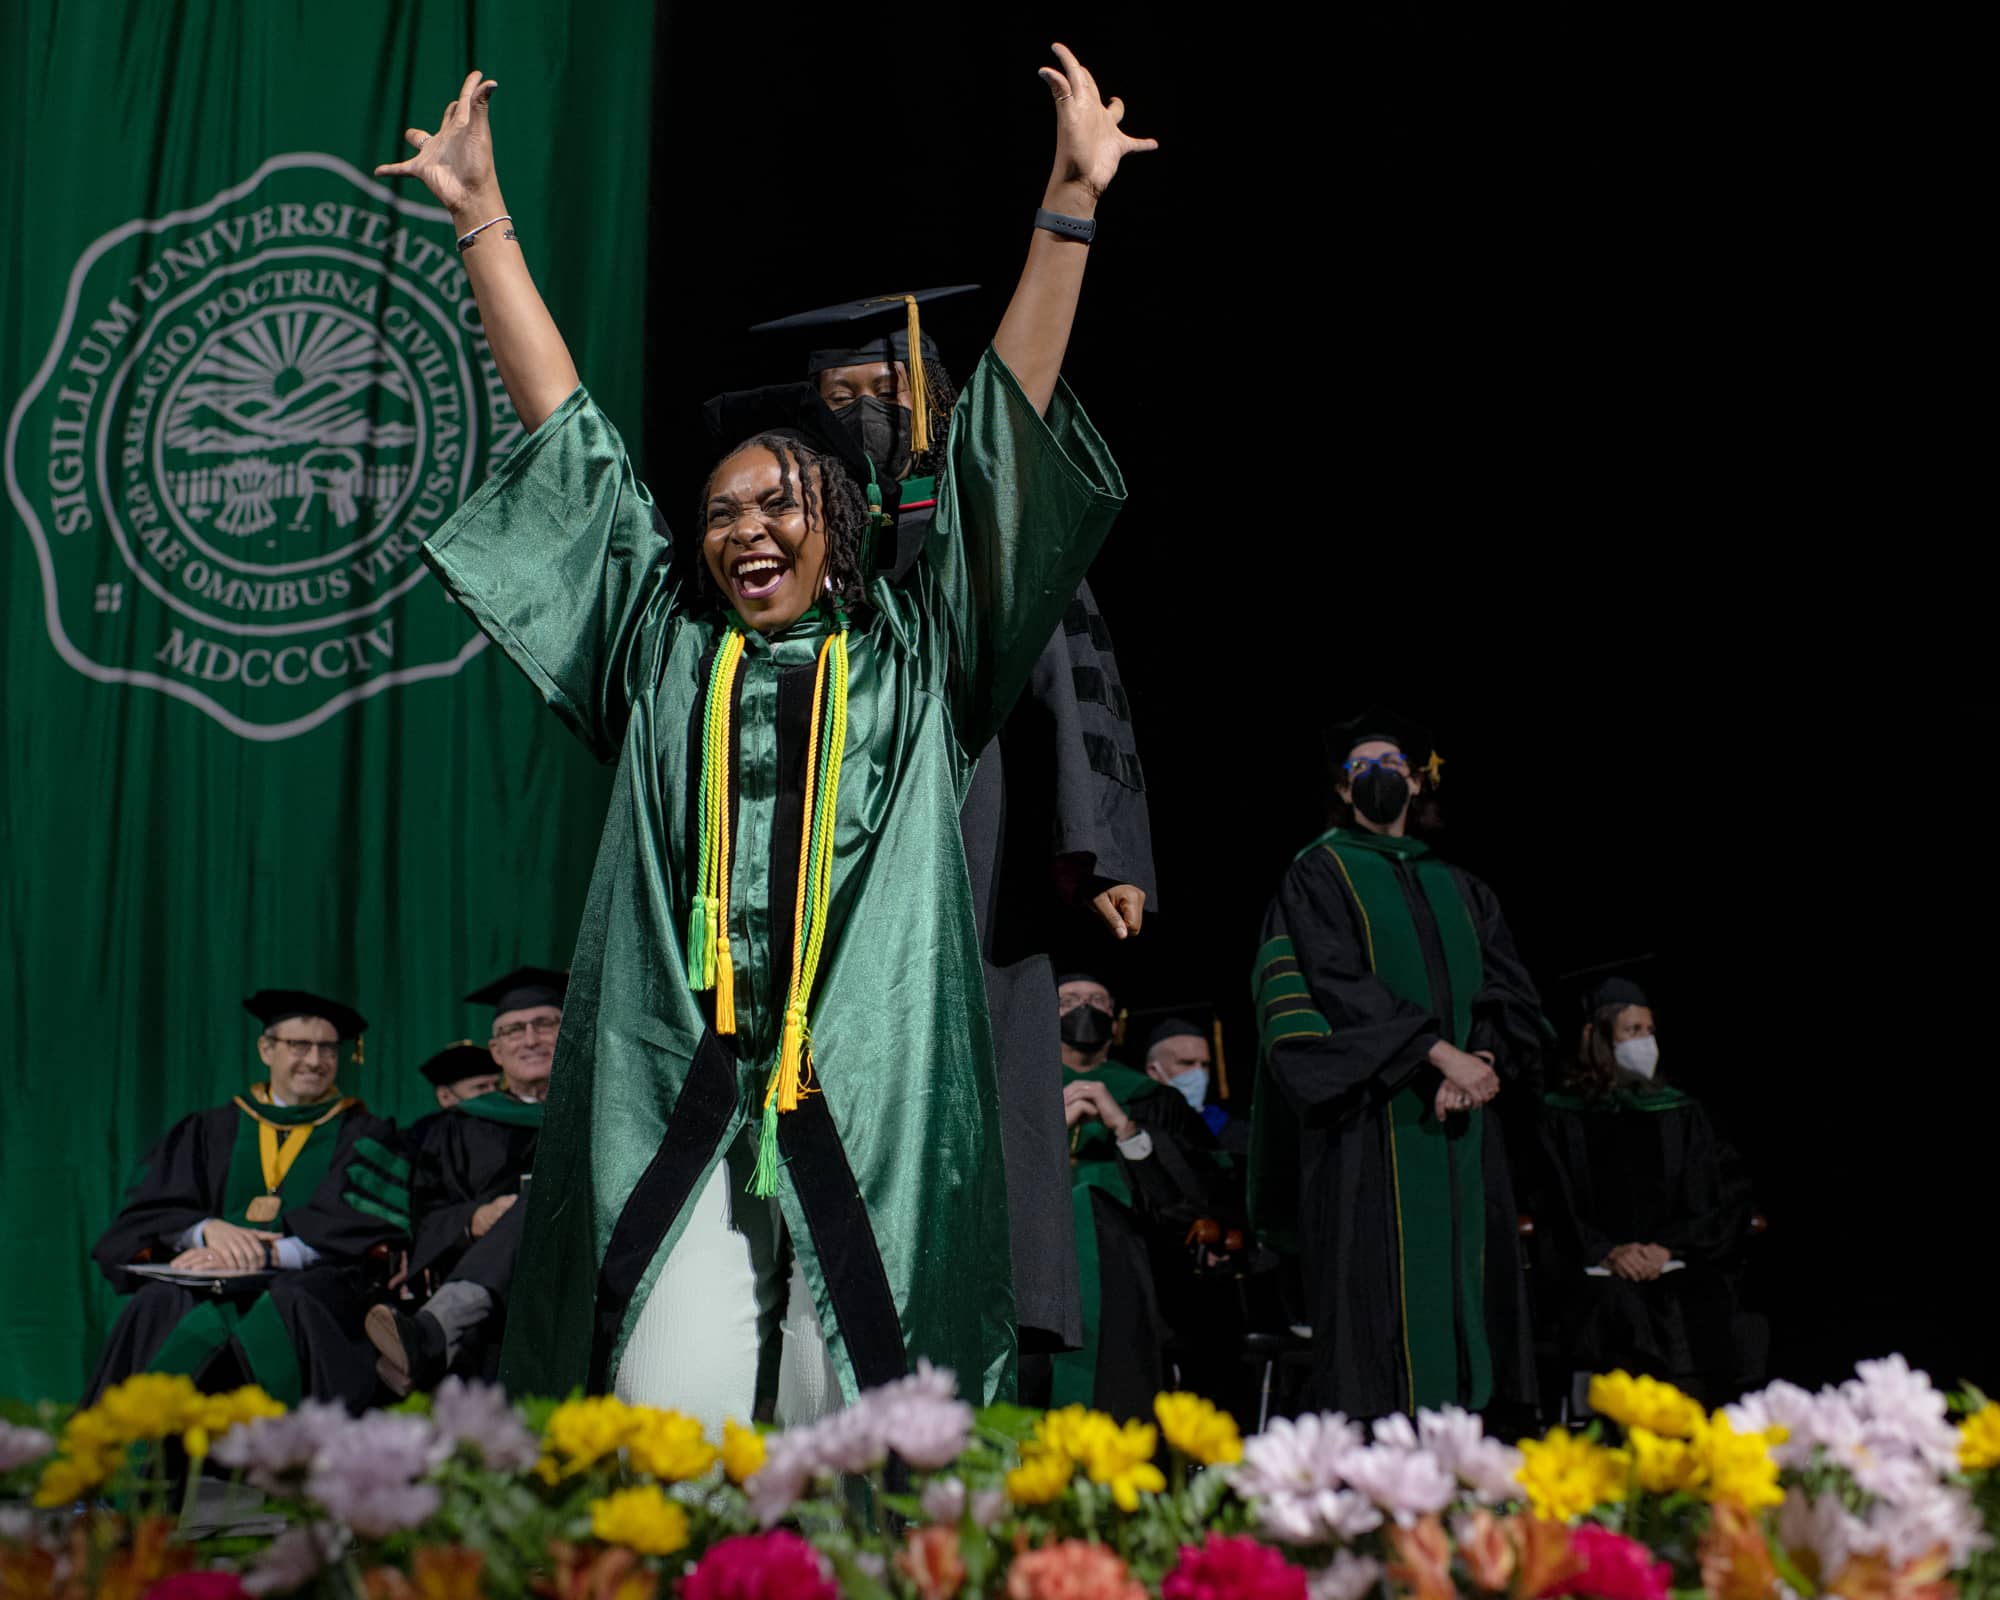 A student reacts during commencement for the Heritage College of Osteopathic Medicine.